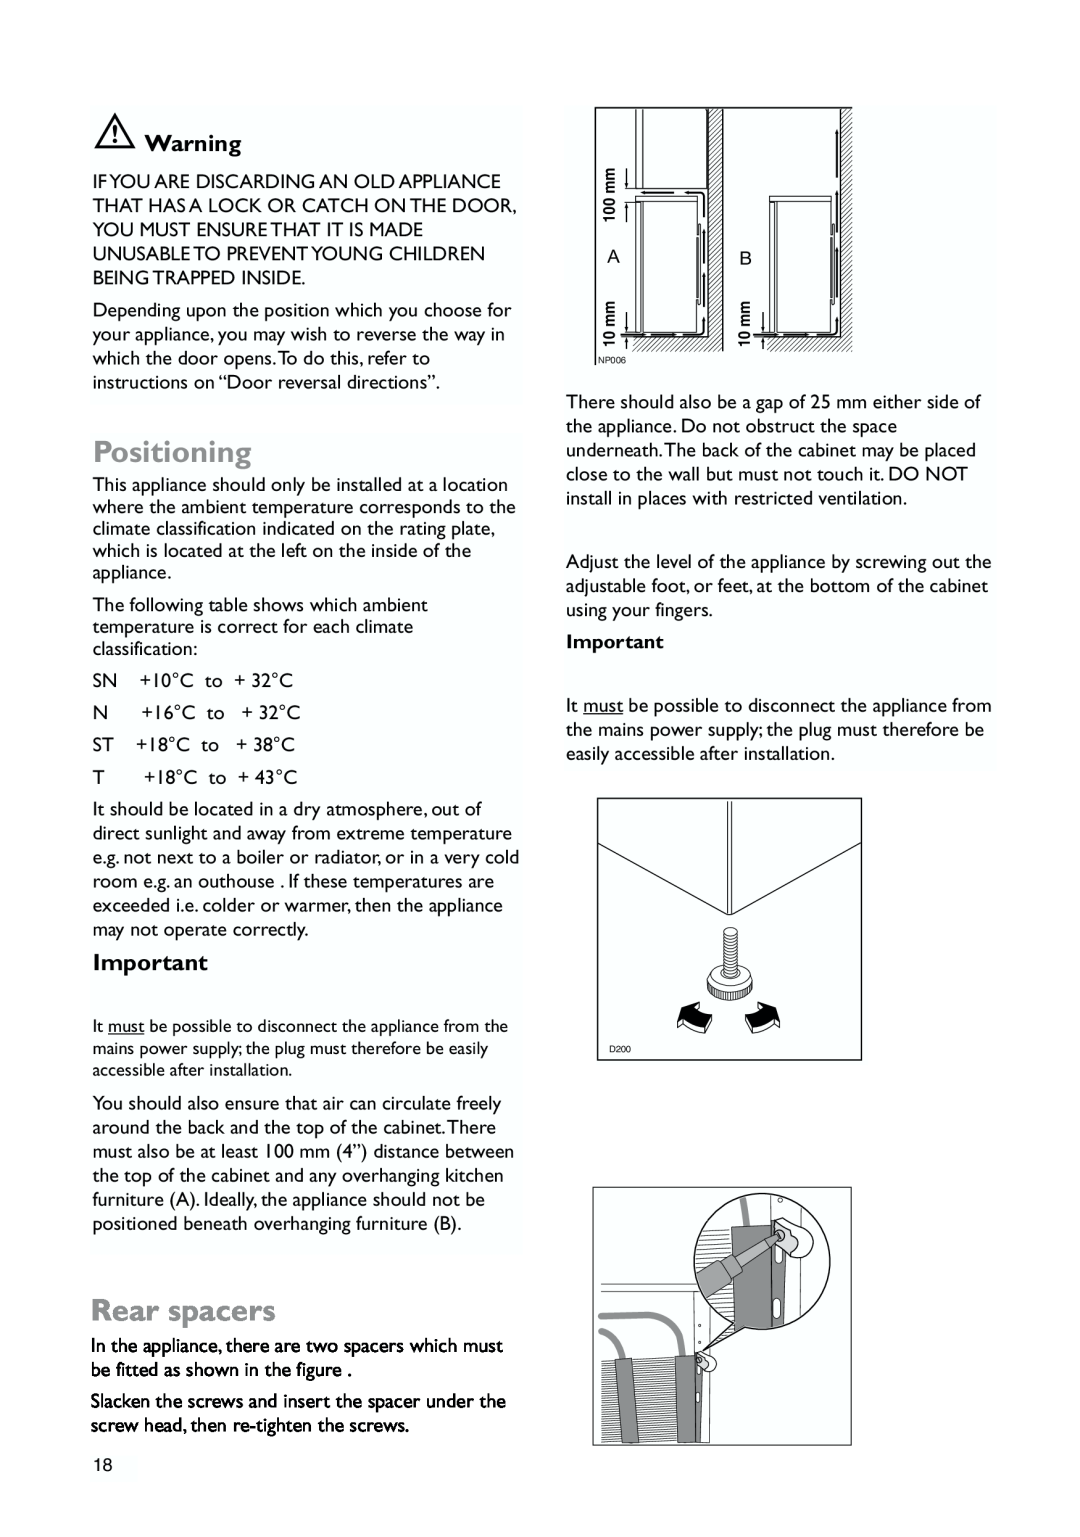 John Lewis JLLFW1809 instruction manual Positioning, Rear spacers 